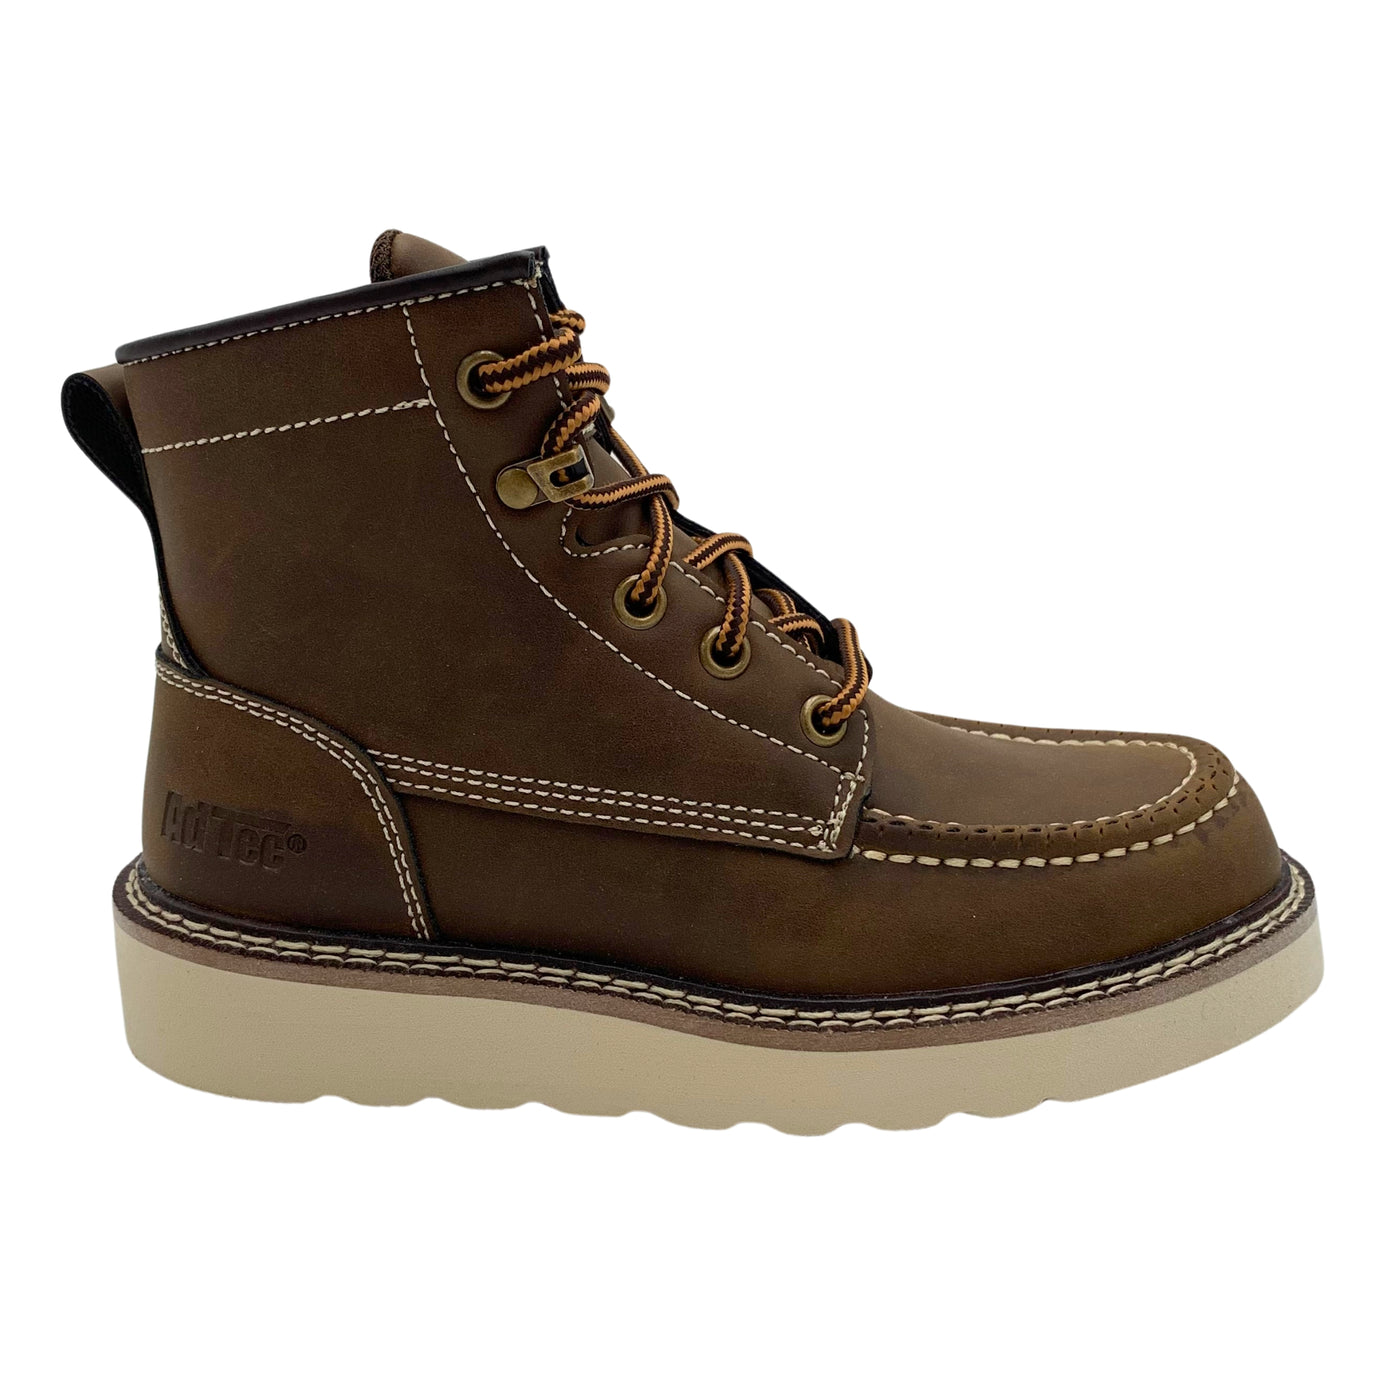 Cypress: Kid's Classic Style Moc Toe Work Boot- Brown 4144